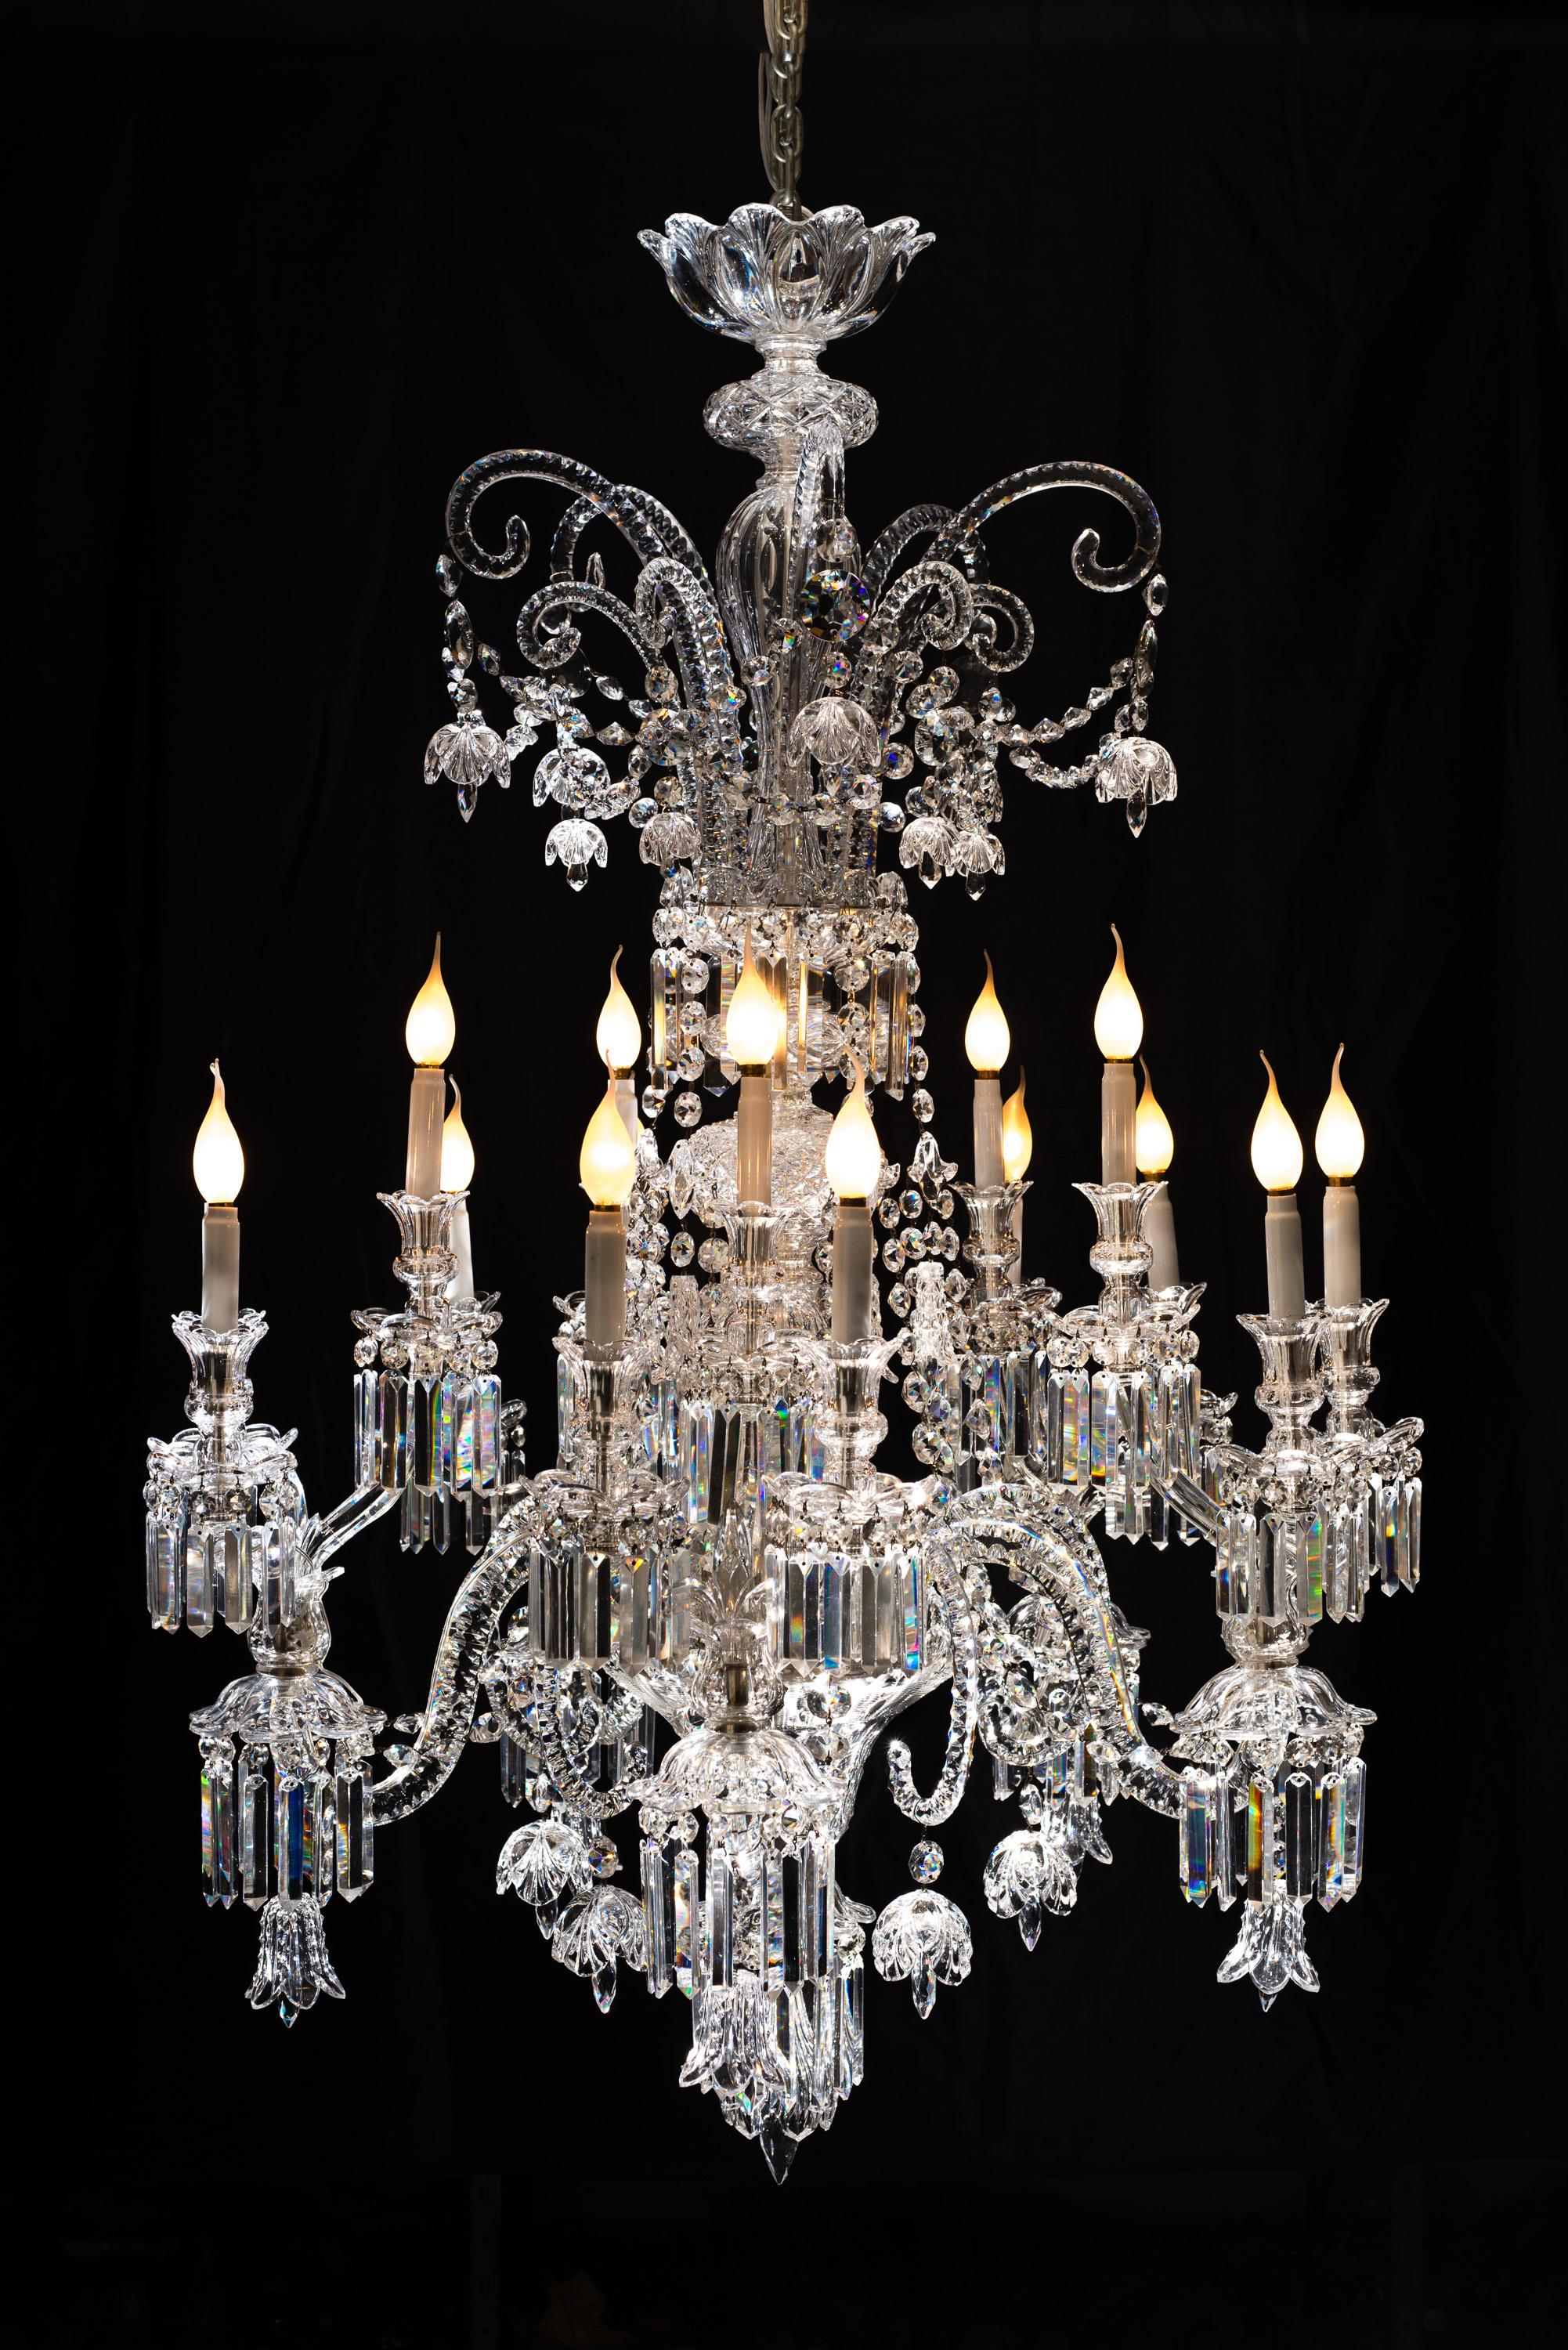 Baccarat Crystal Exceptional Chandelier, France, Early 19th Century For Sale 11